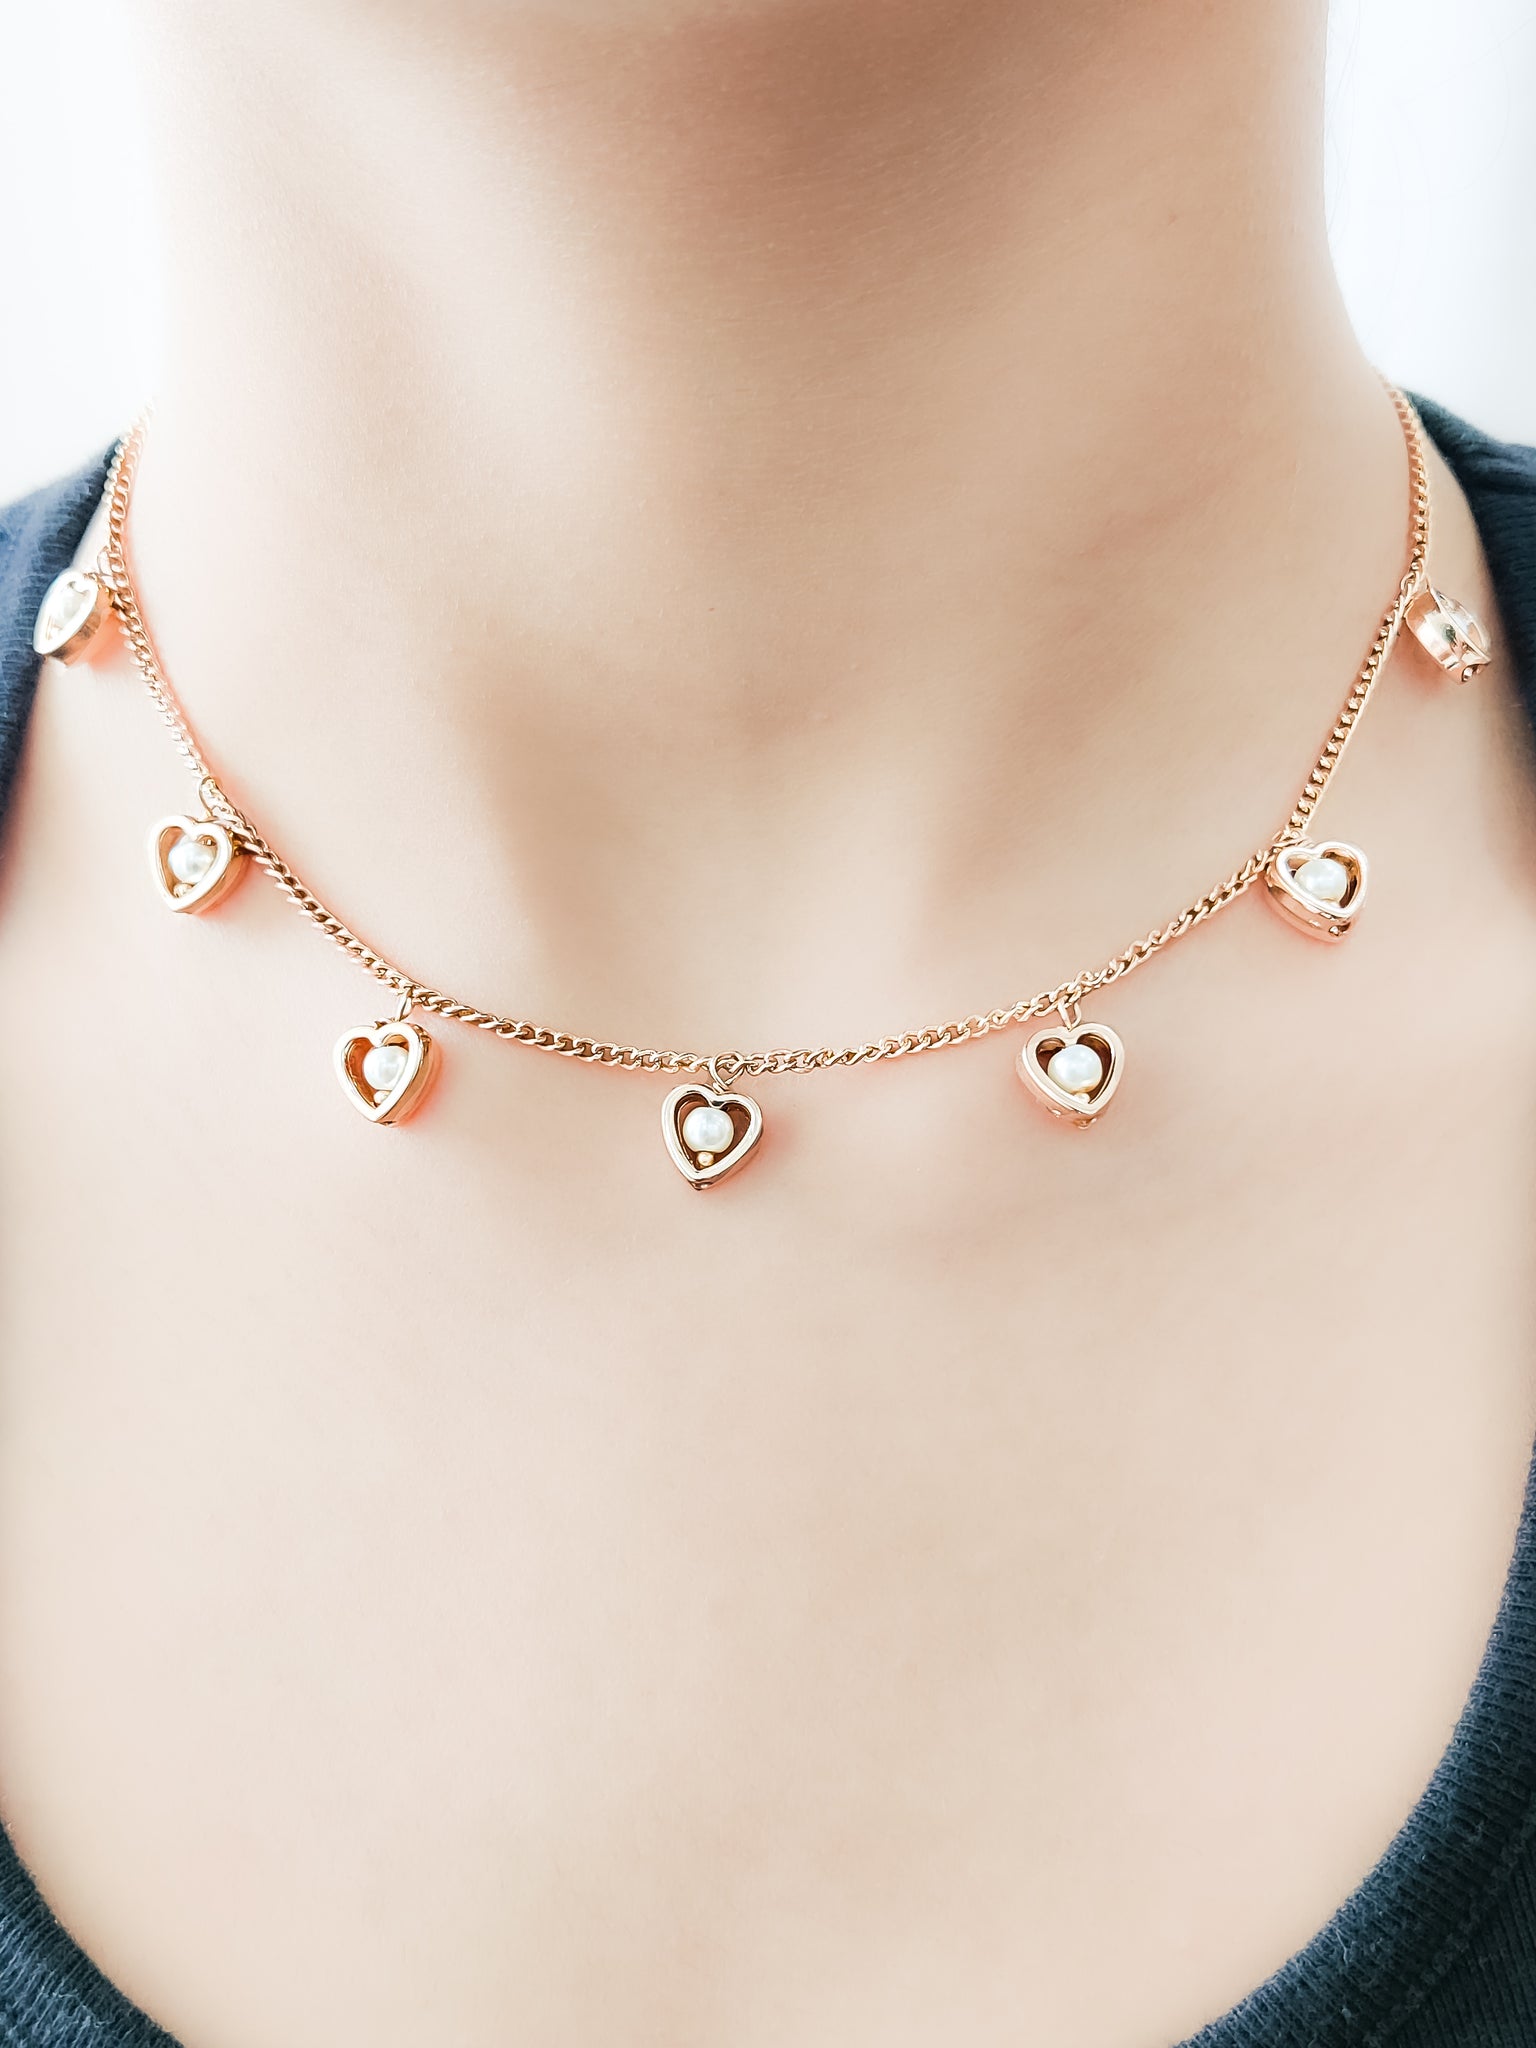 Dainty handcrafted heart necklace